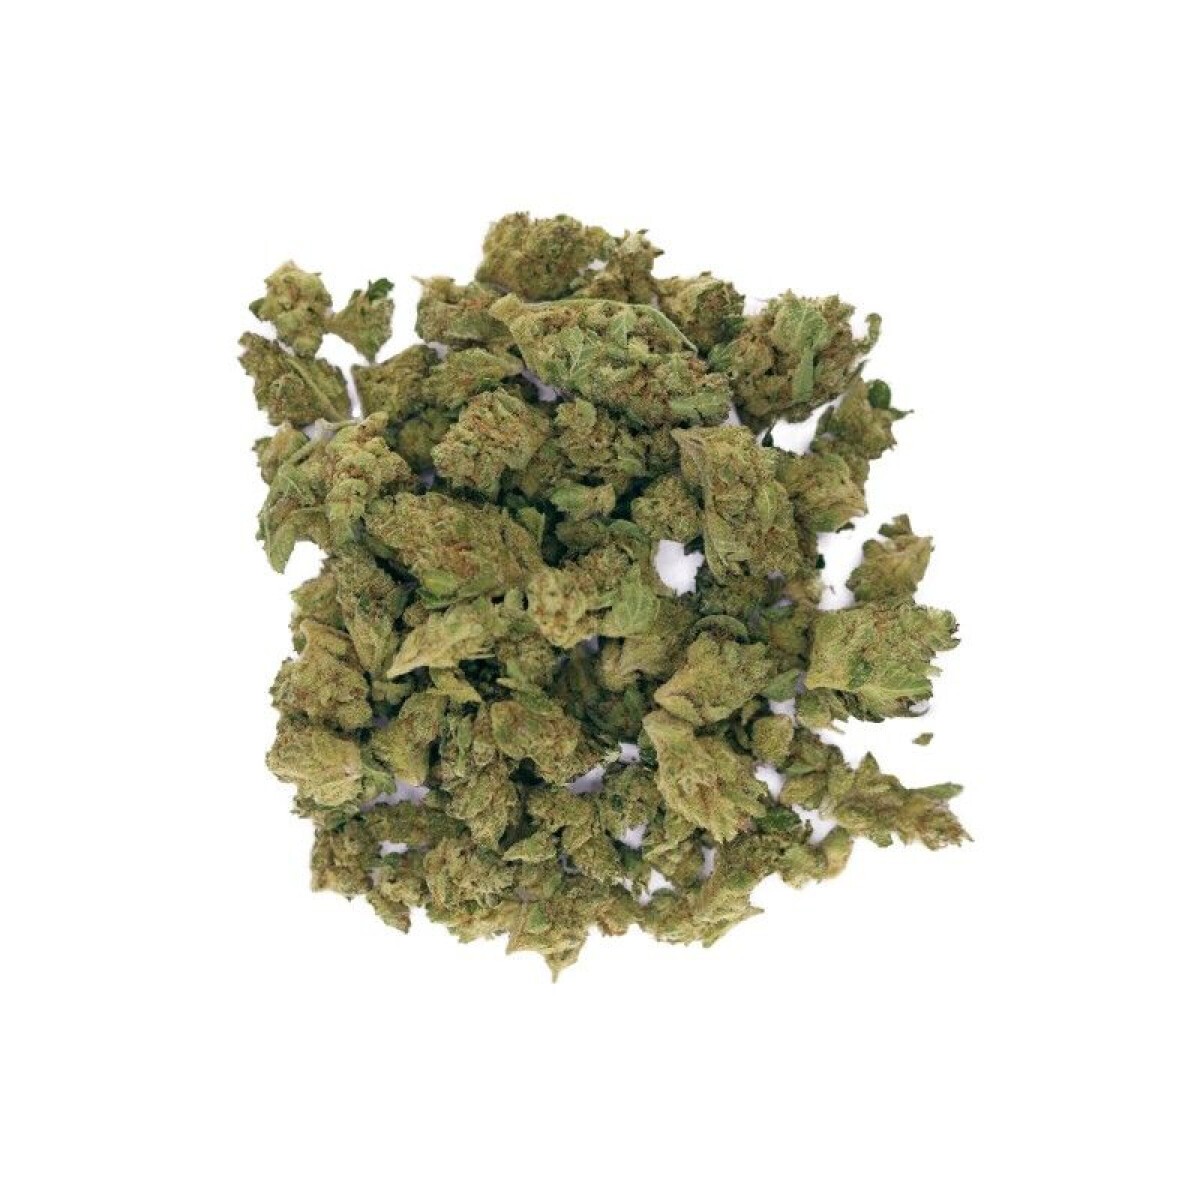 Dreamer's Glass Weed Strain Review and Information